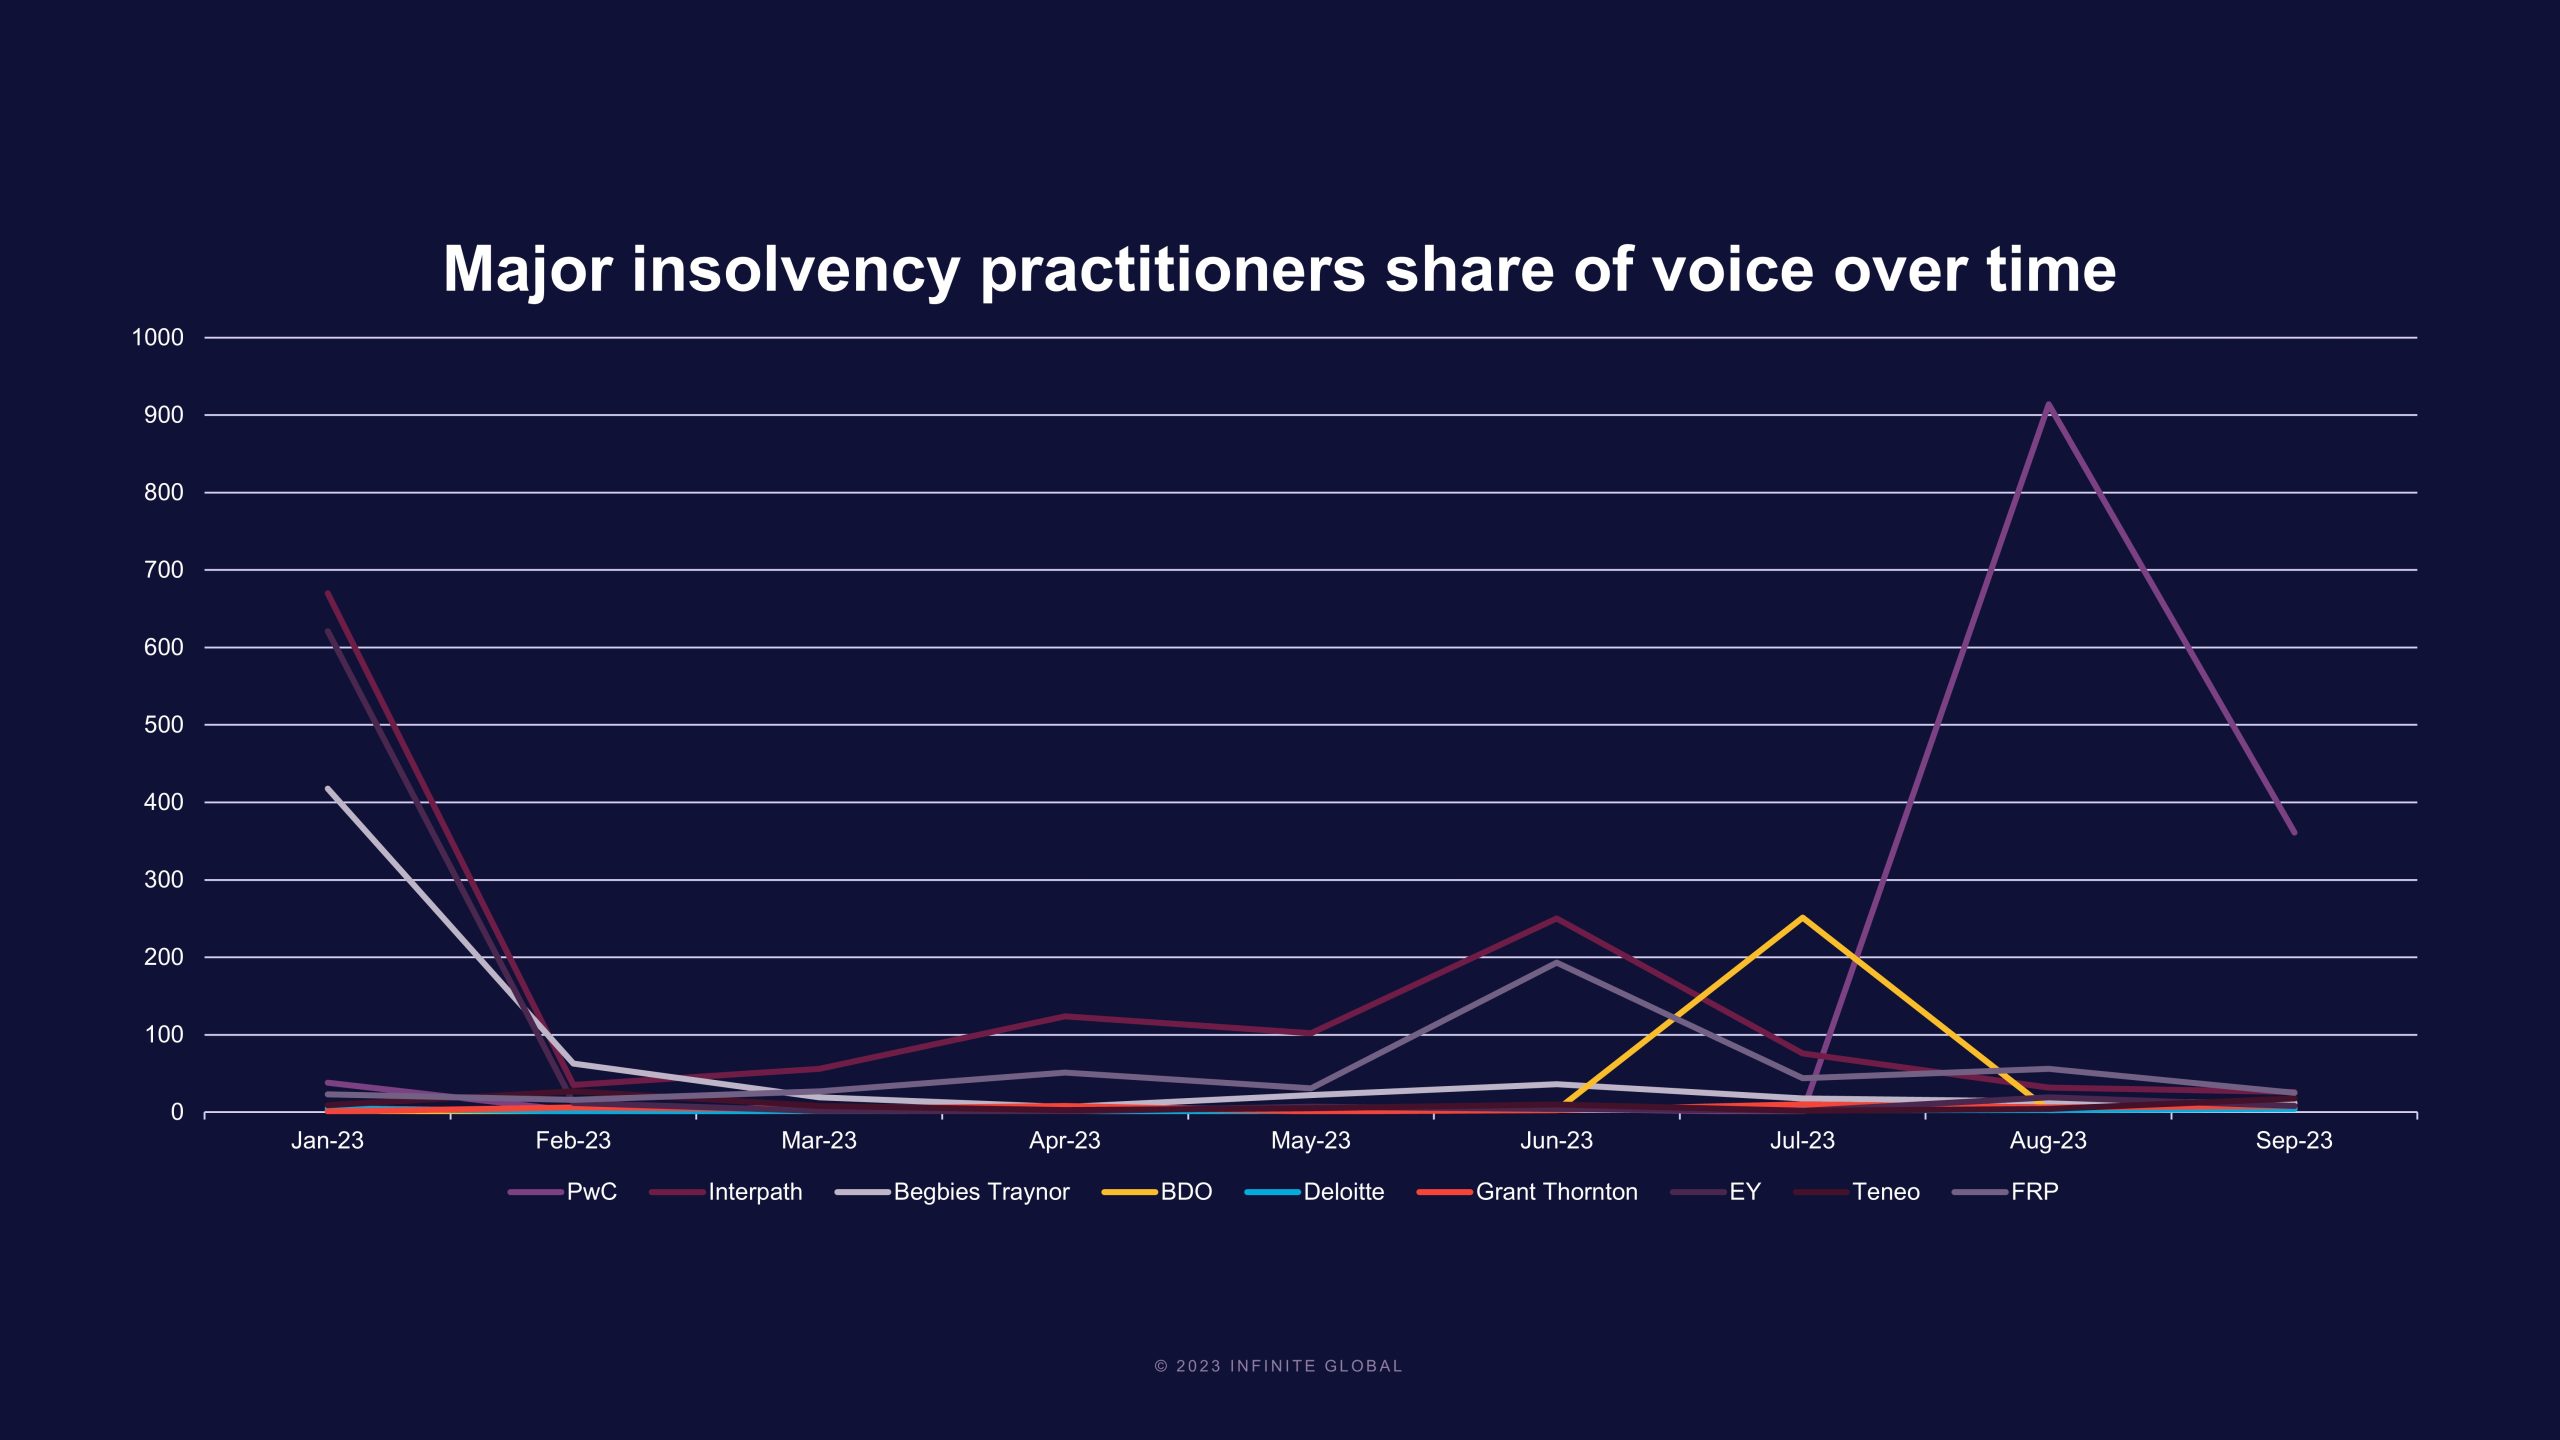 Major insolvency practitioners share of voice over time